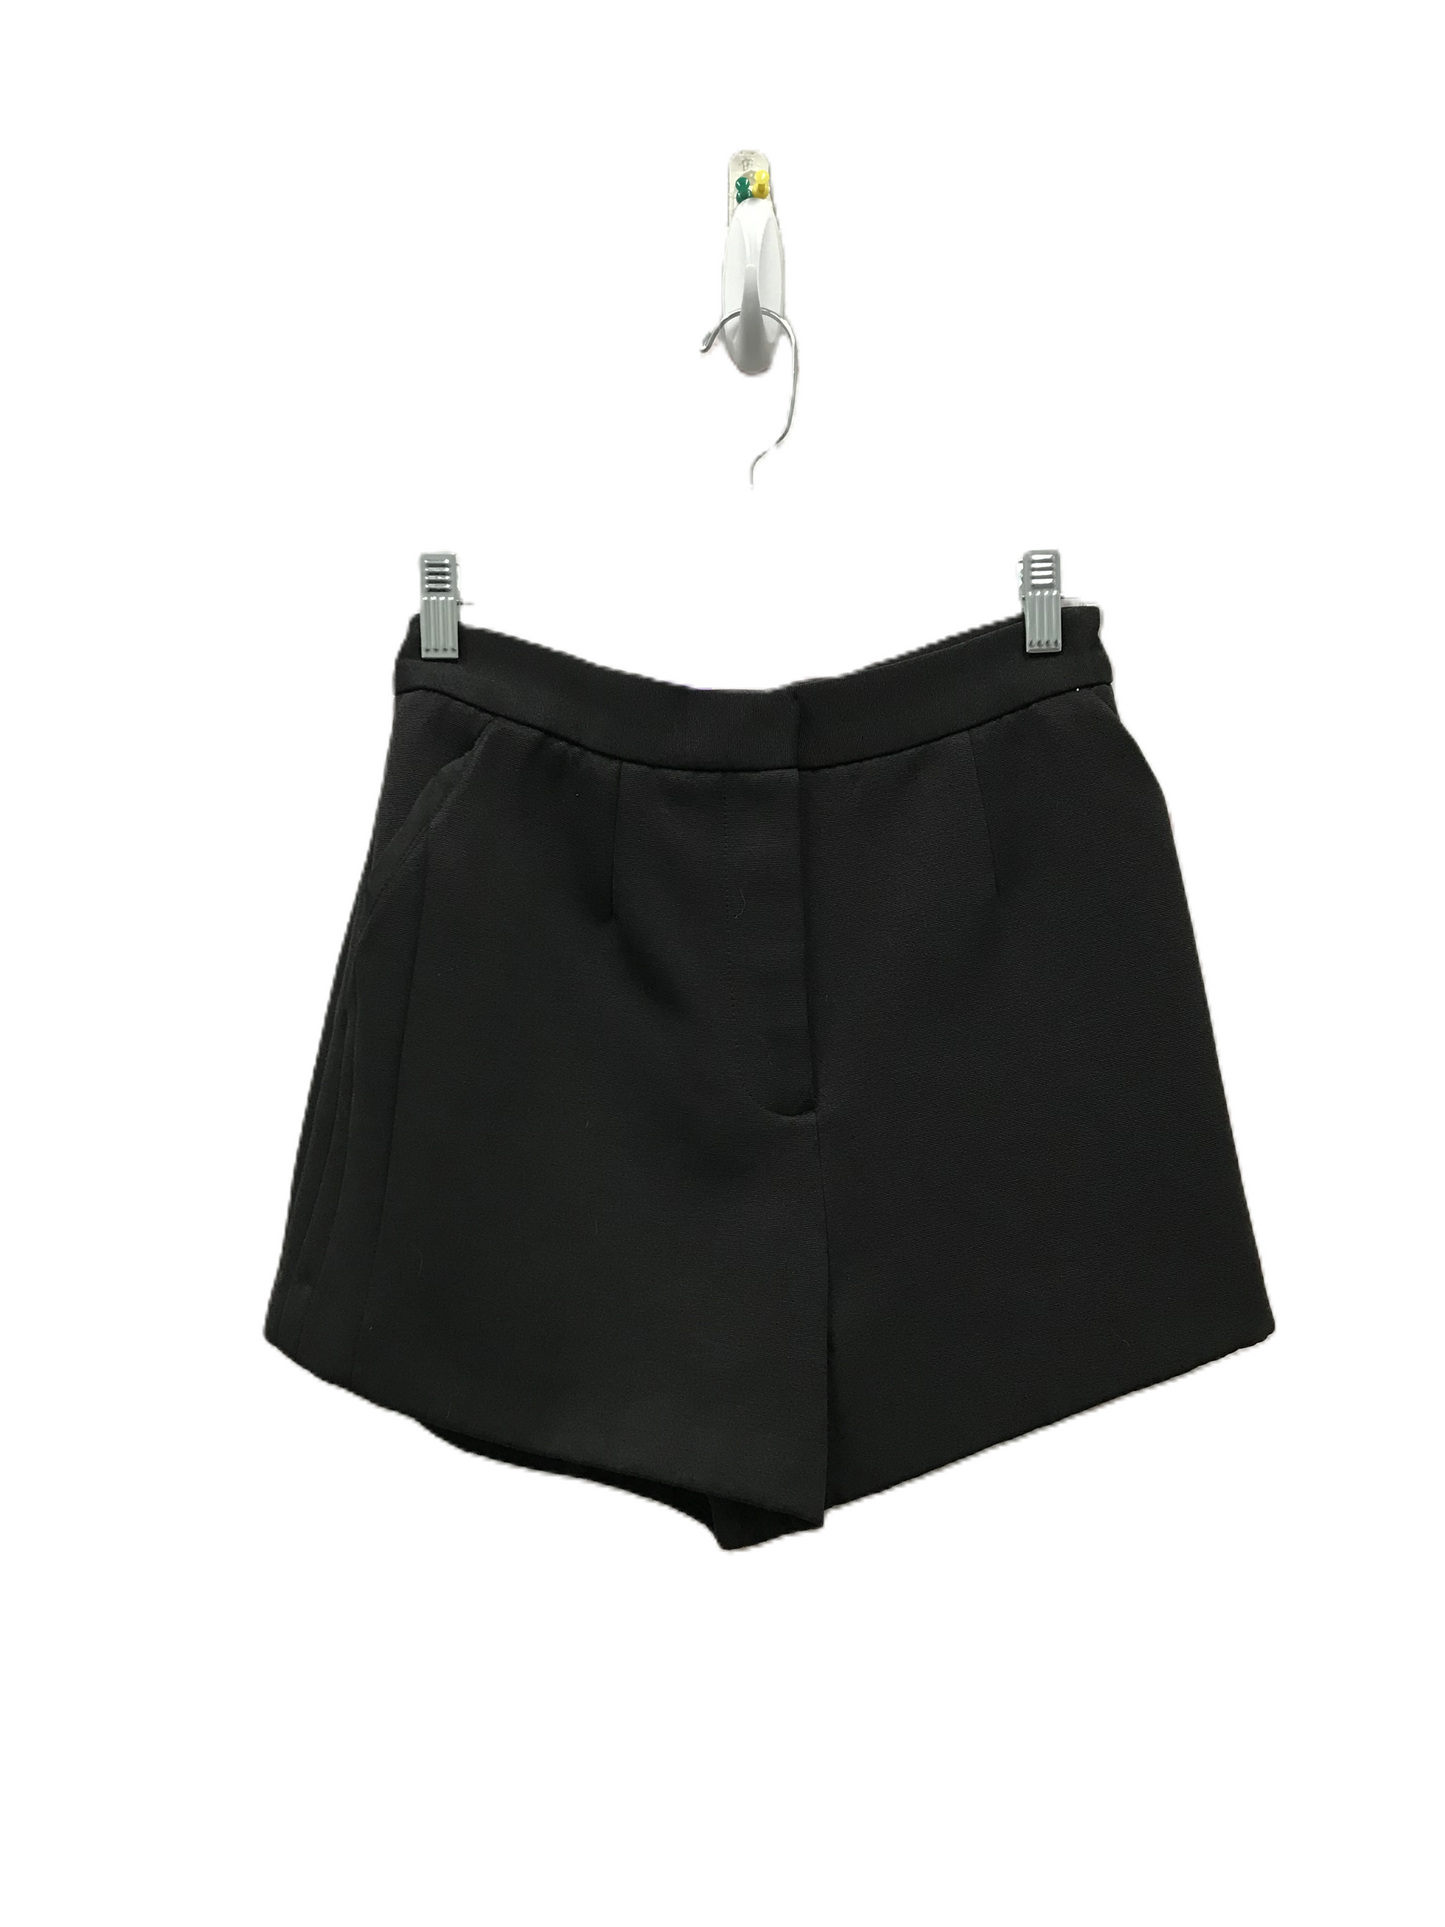 Black Shorts By Finders, Size: M